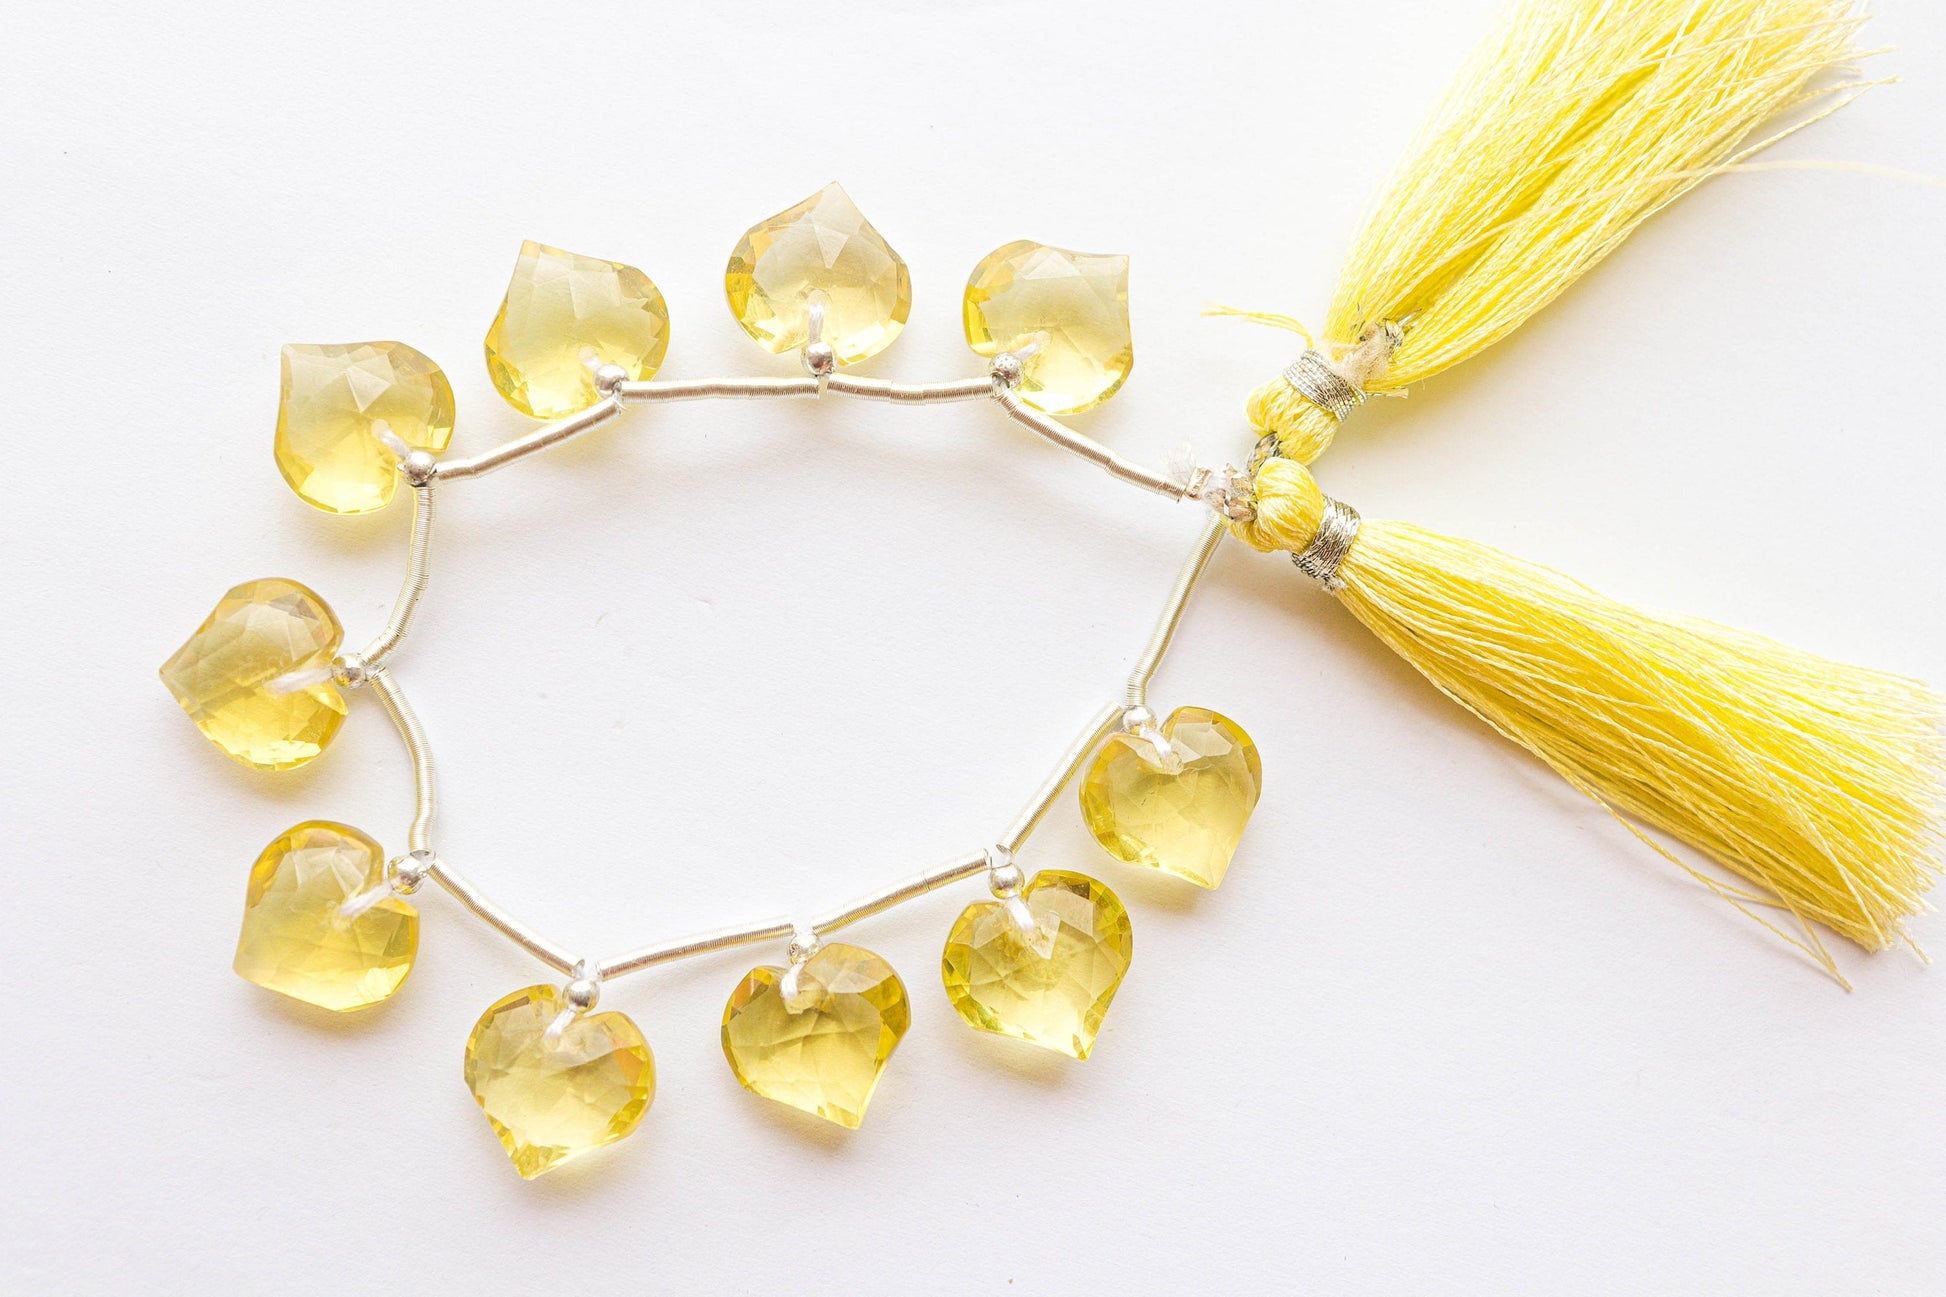 Lemon Quartz Beads Faceted Heart Shape | 12x12mm | 6 inch | 10 Pieces | Face Drill | Natural gemstone beads | Beadsforyourjewellery Beadsforyourjewelry